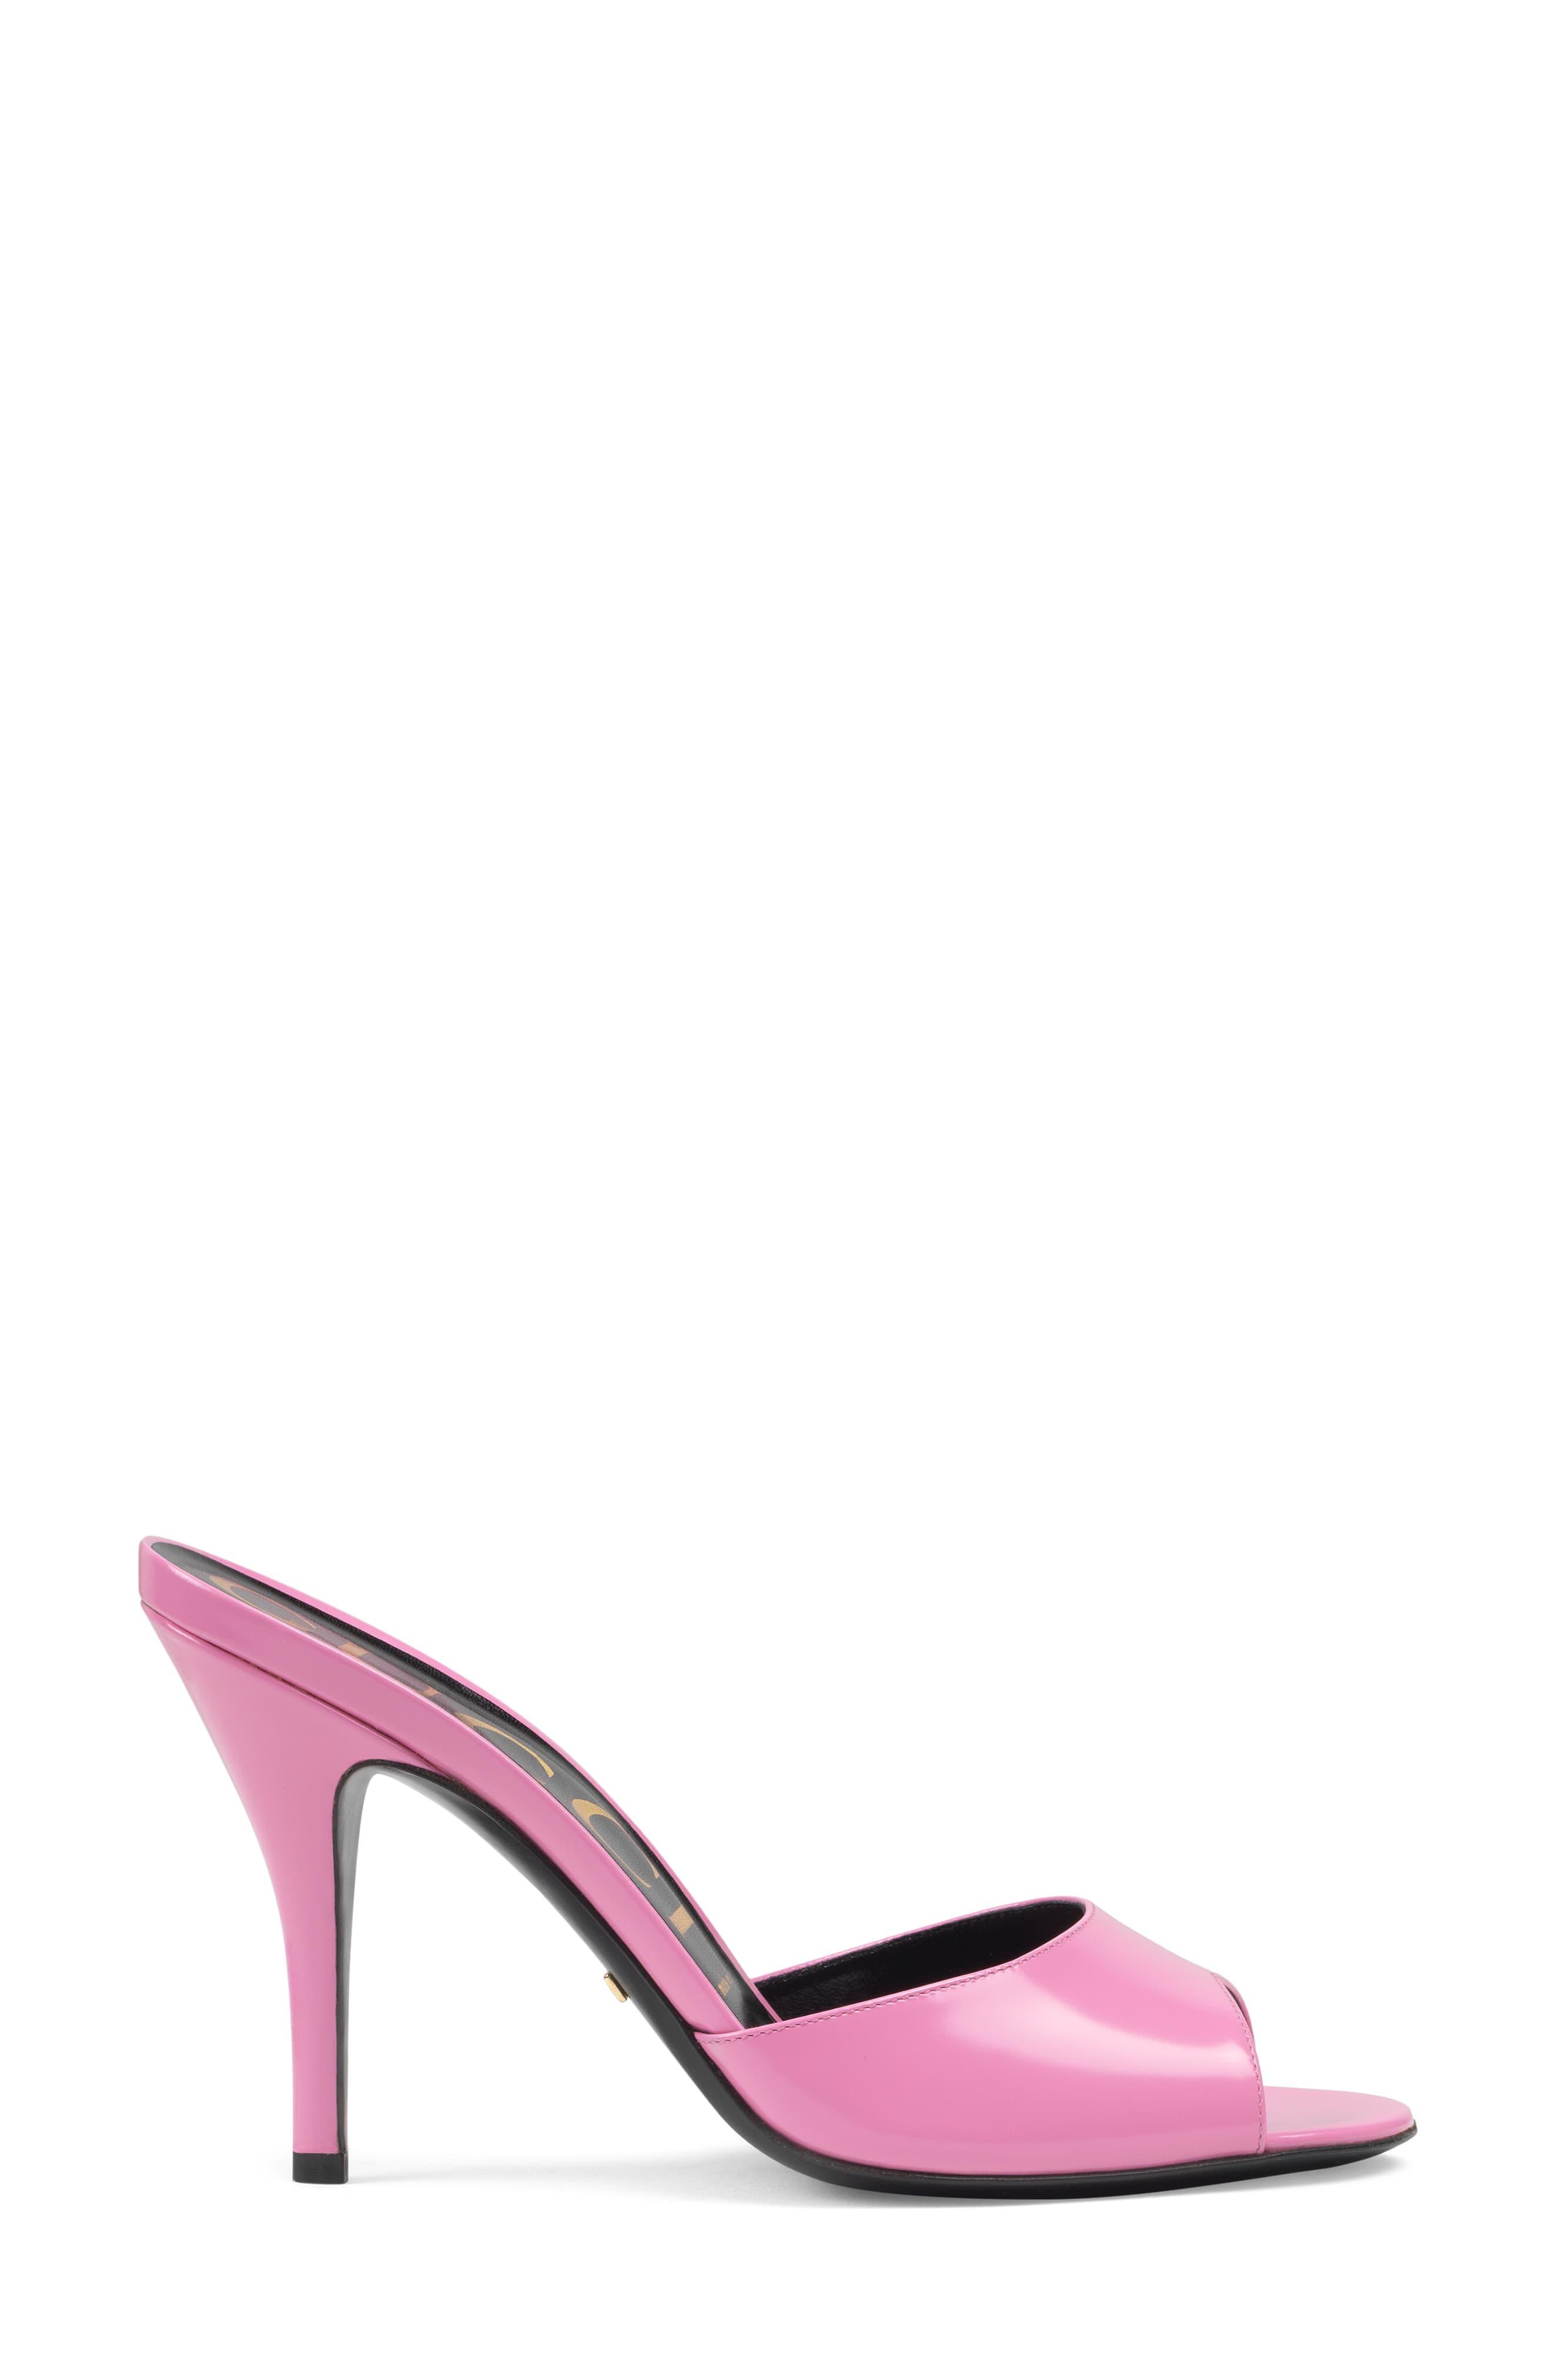 Gucci Leather Heeled Slide in Pink - Lyst